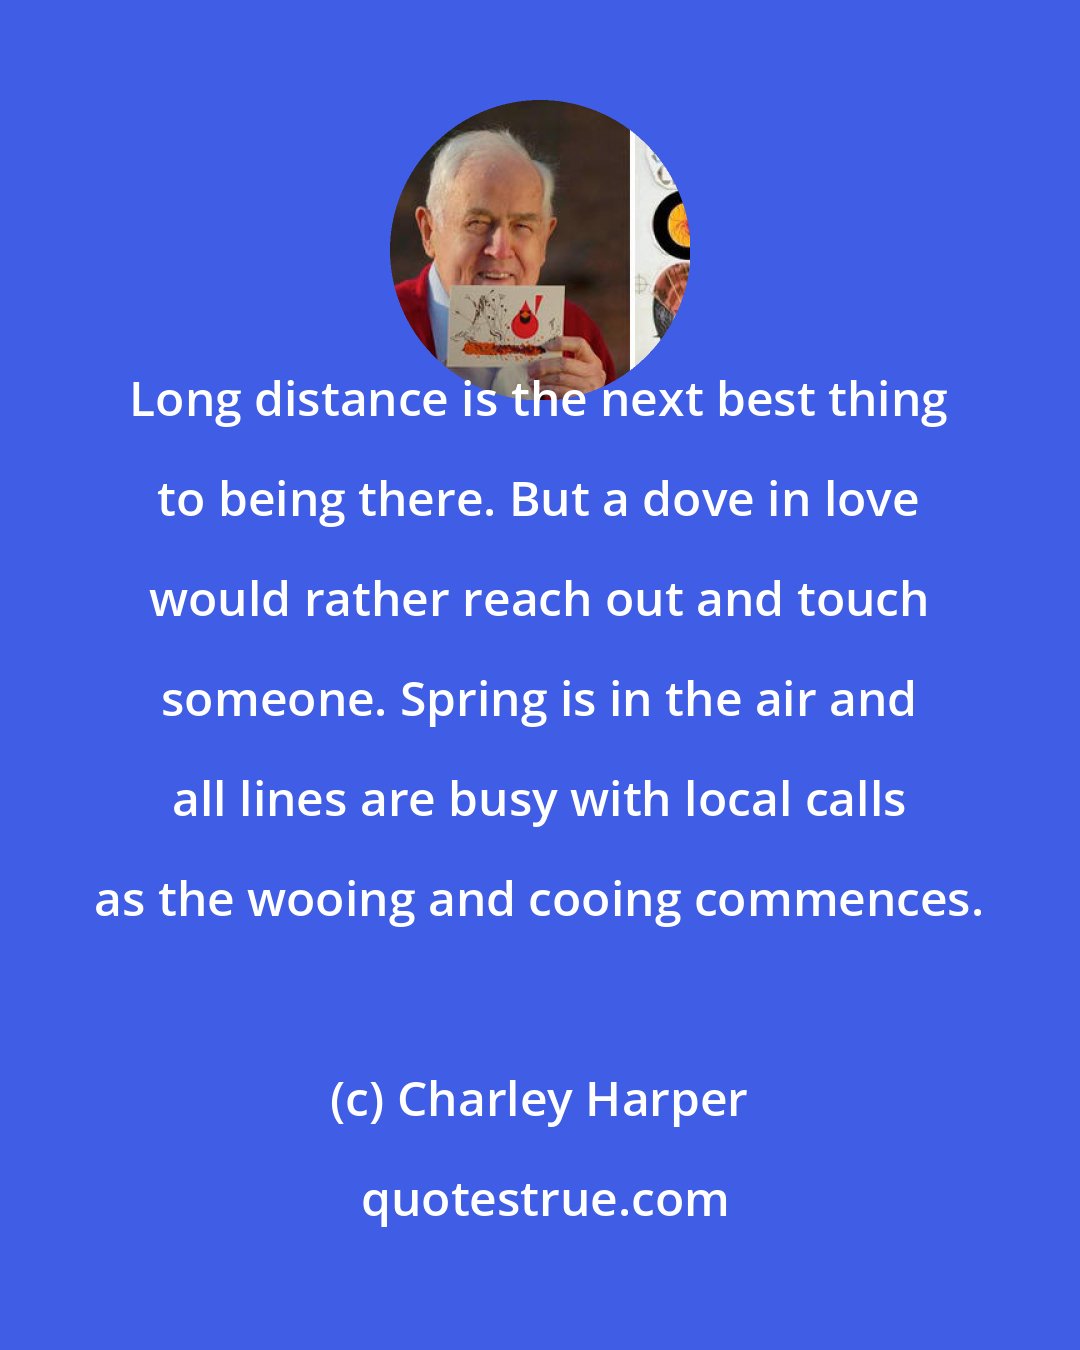 Charley Harper: Long distance is the next best thing to being there. But a dove in love would rather reach out and touch someone. Spring is in the air and all lines are busy with local calls as the wooing and cooing commences.